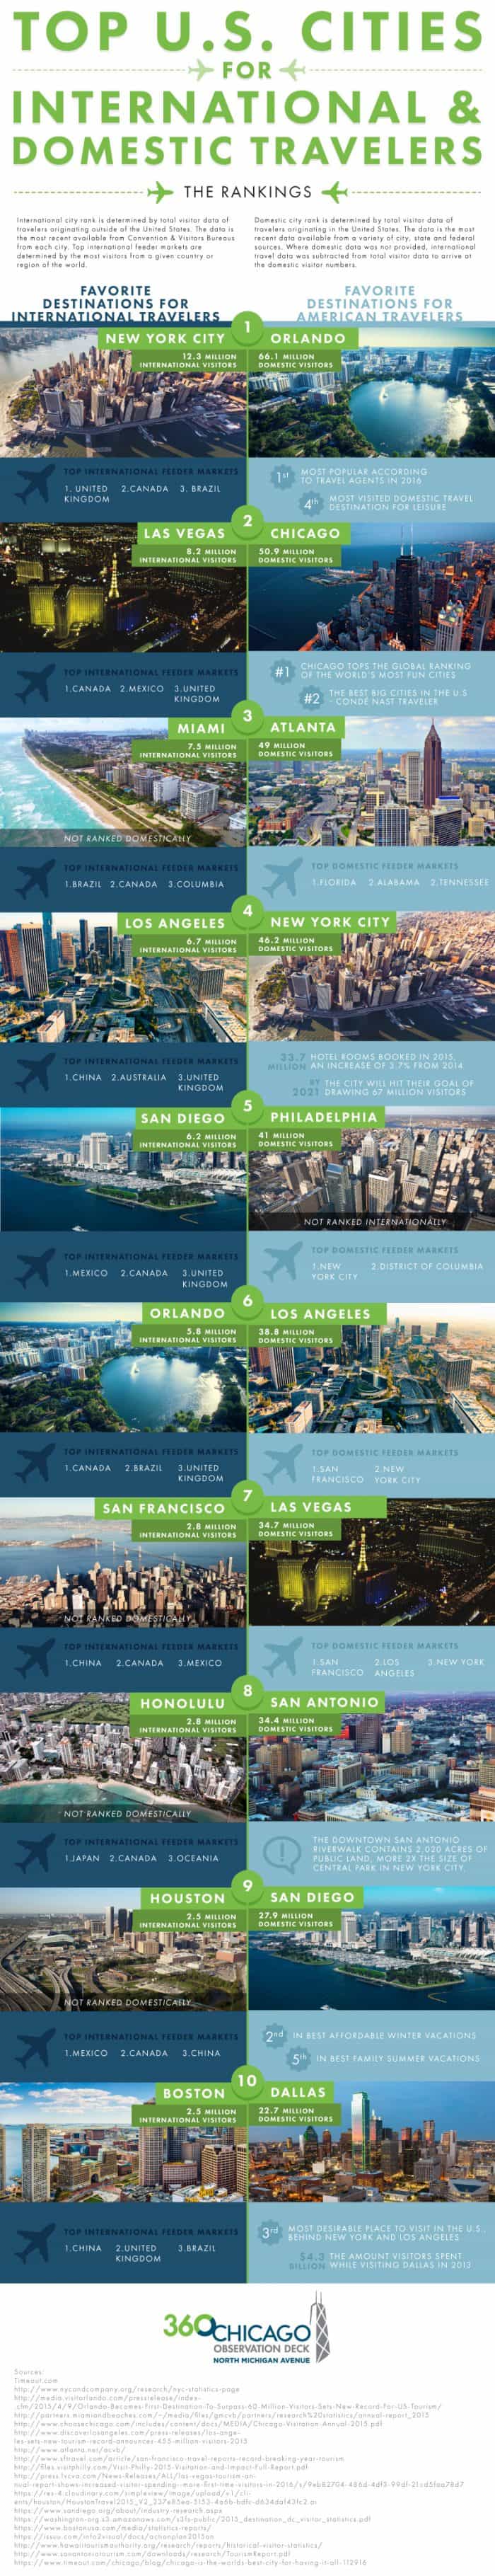 favorite destinations in the US for intl and domestic travelers infographic